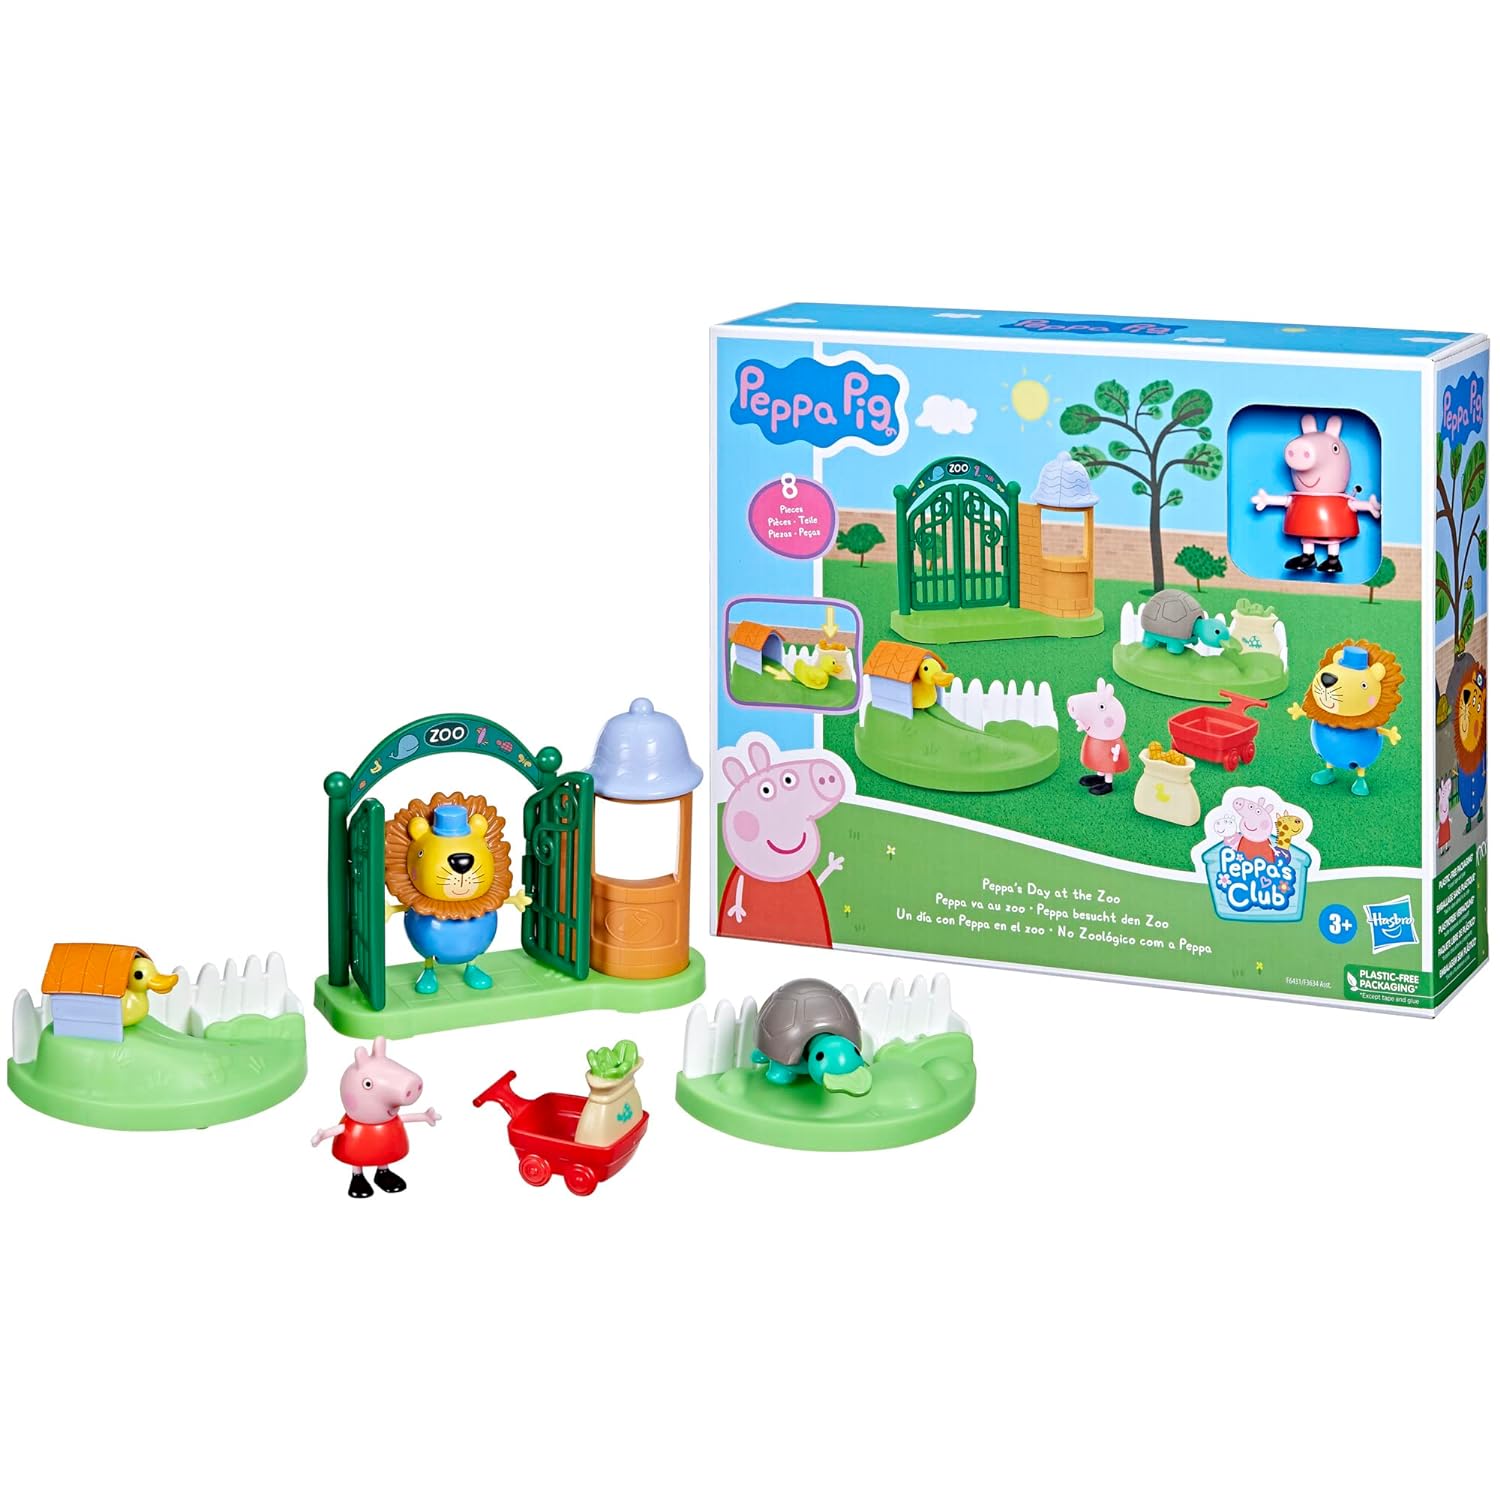 Hasbro Peppa Pig Toys Peppa's Day at The Zoo Playset, 2 Figures and 6 Themed Accessories, 3-Inch Scale Preschool Toy for Kids Ages…